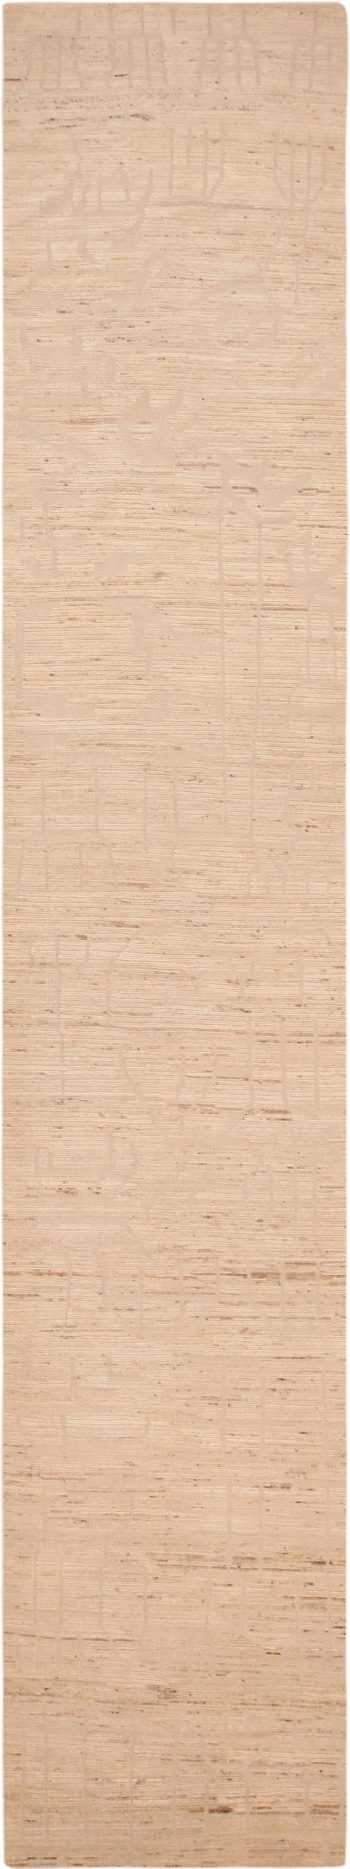 Cream Color Modern Moroccan Style Runner Rug 61063 by Nazmiyal Antique Rugs